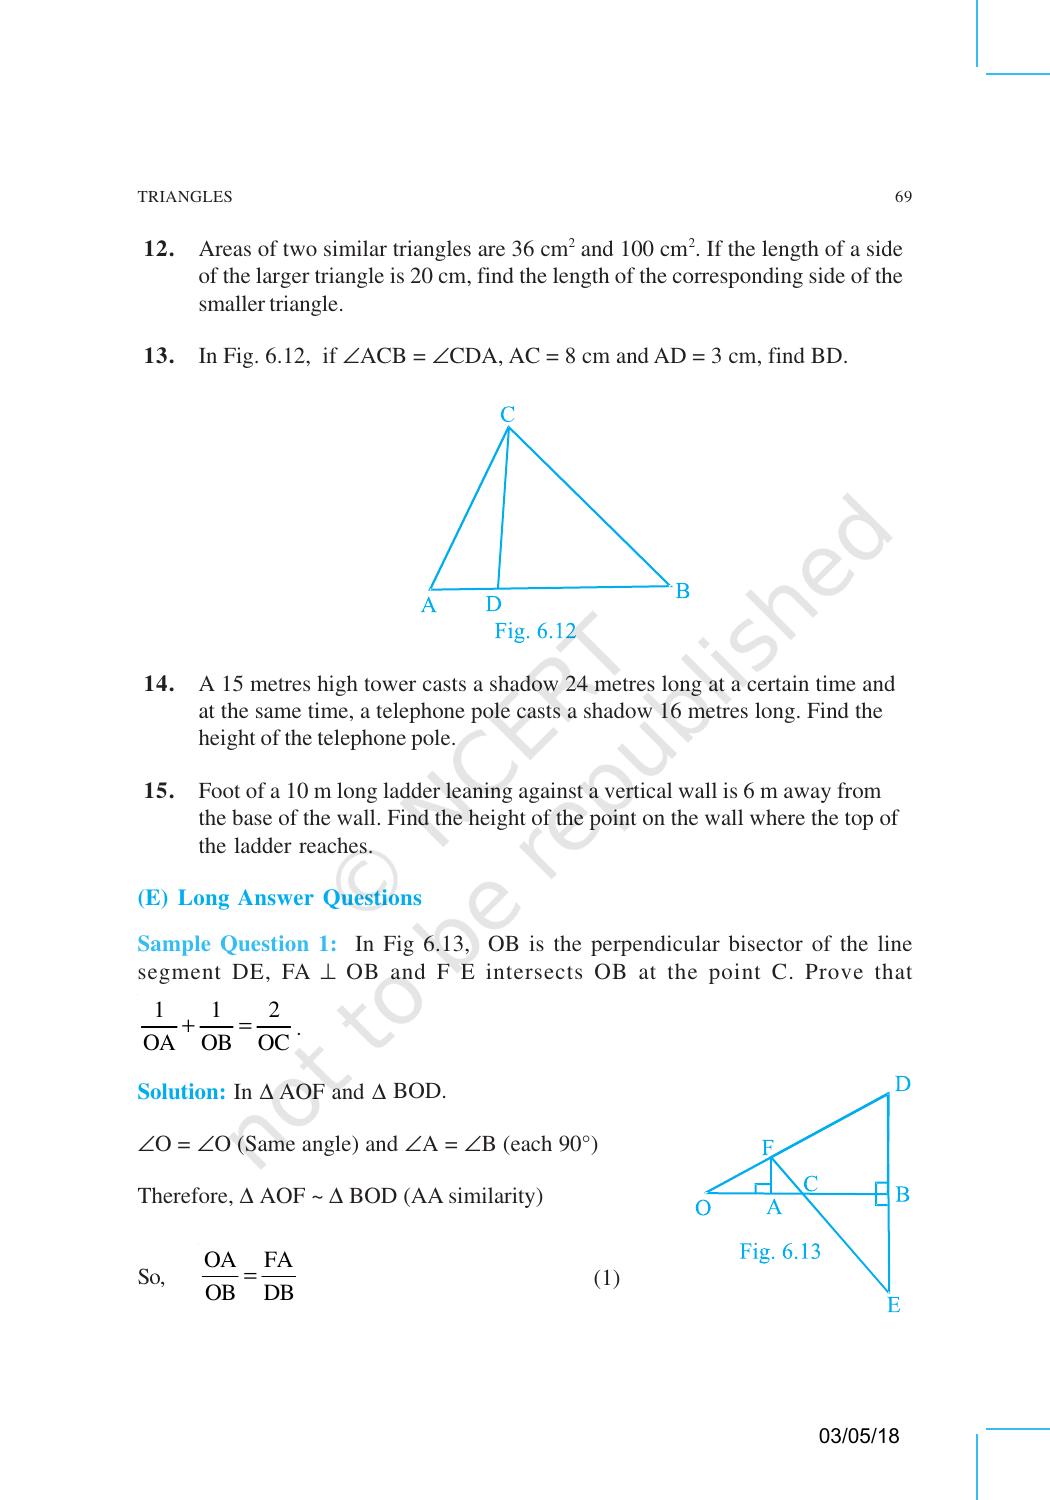 NCERT Exemplar Book for Class 10 Maths: Chapter 6 Triangles - Page 11